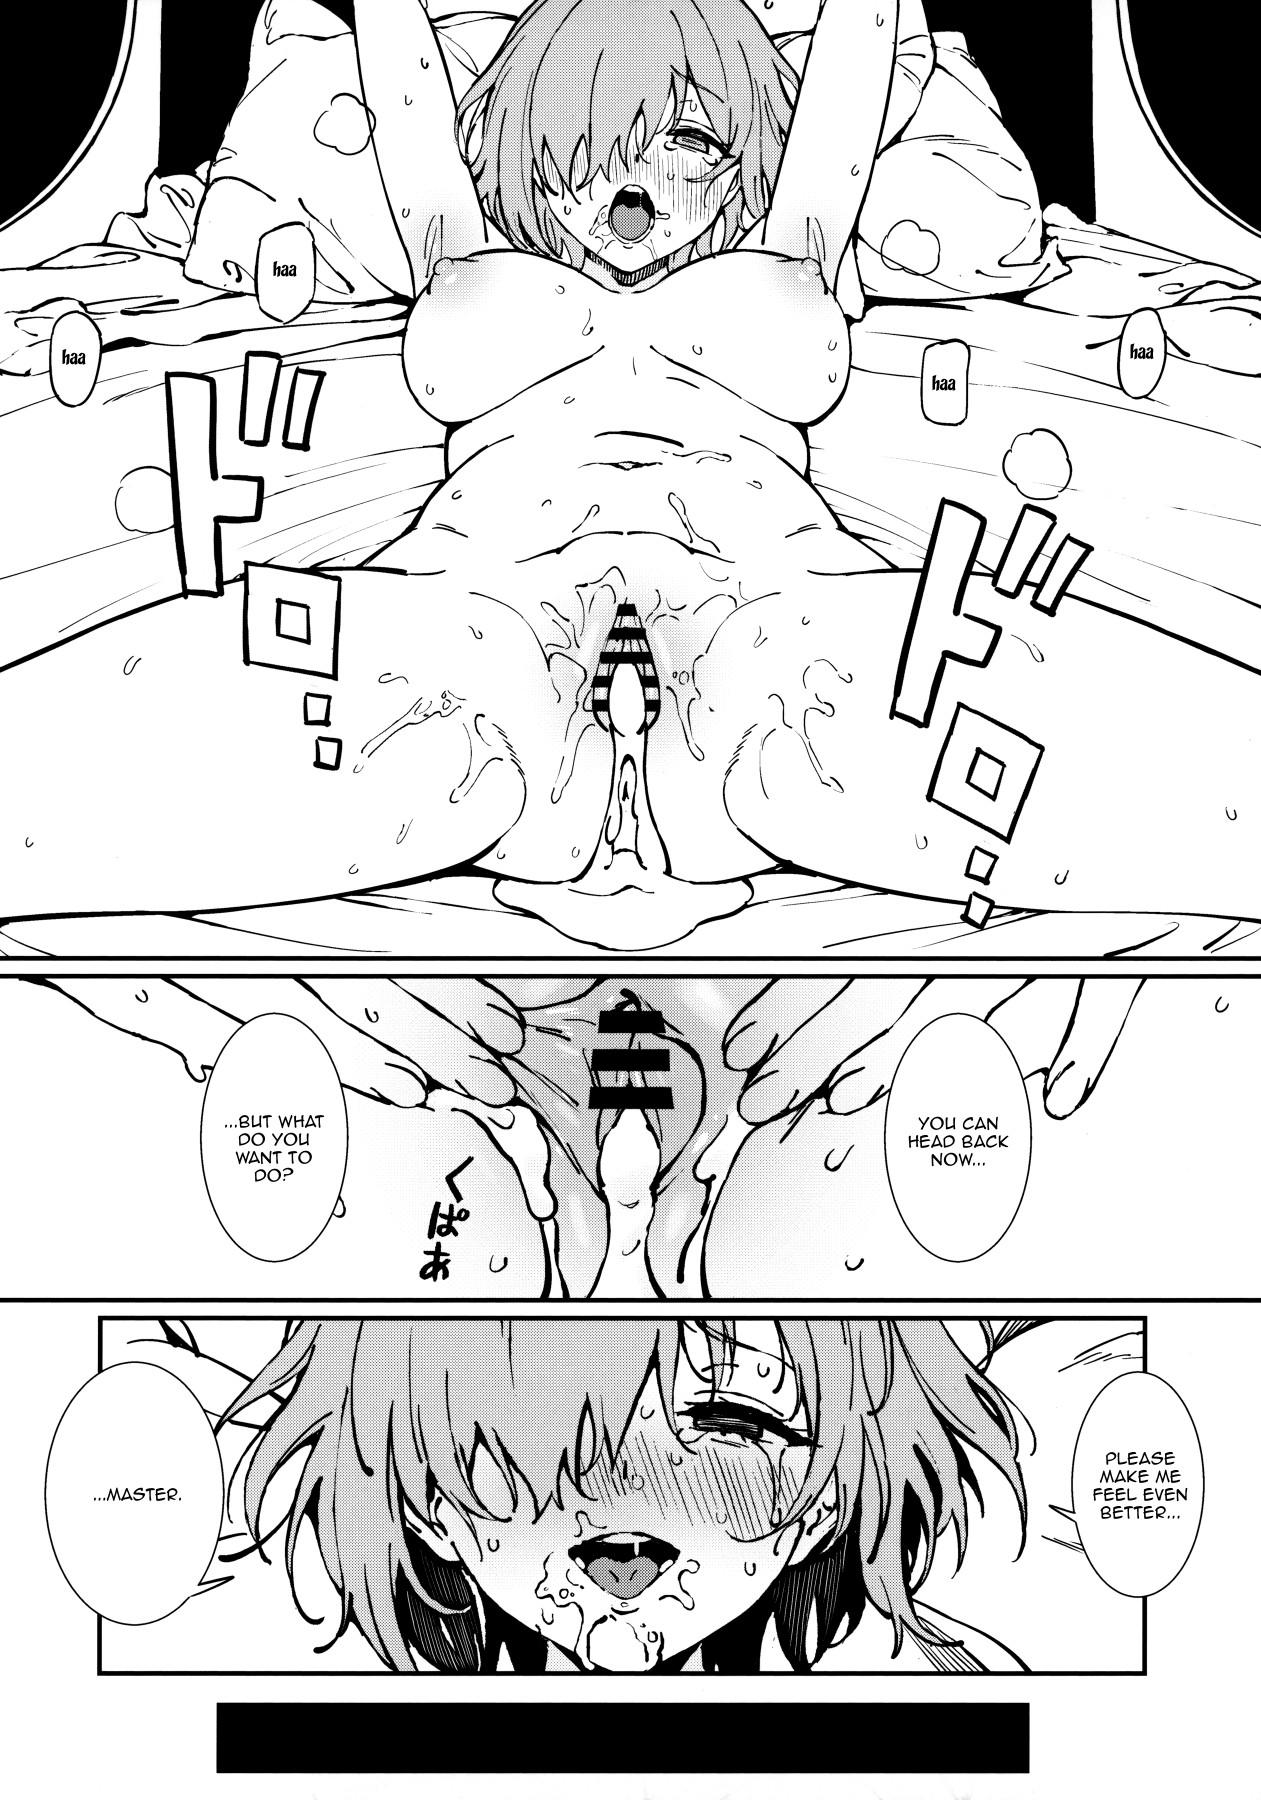 Perfect Body Anten - Fate grand order Free Rough Porn - Page 27